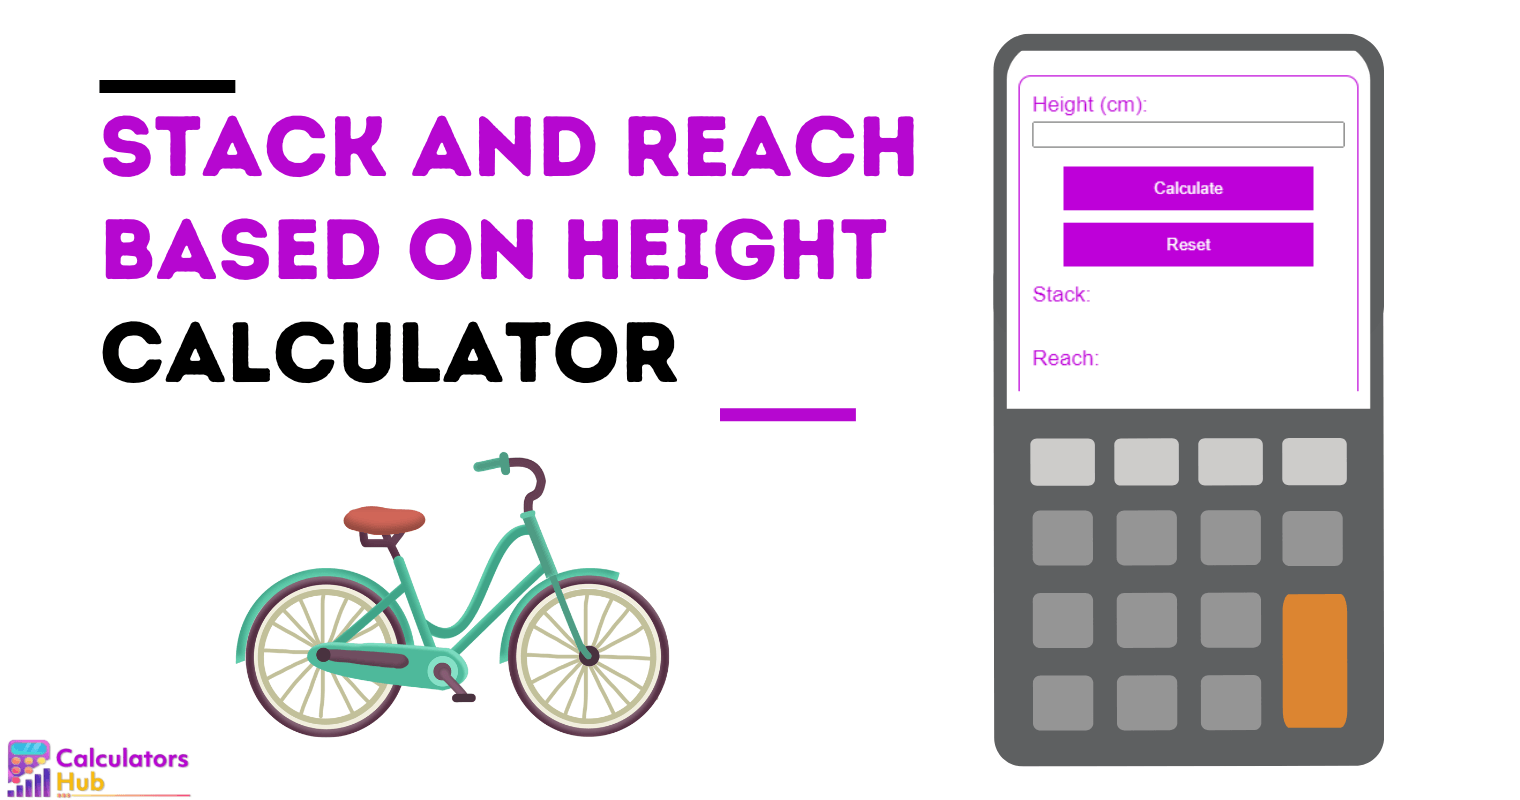 Stack and Reach Calculator Based on Height